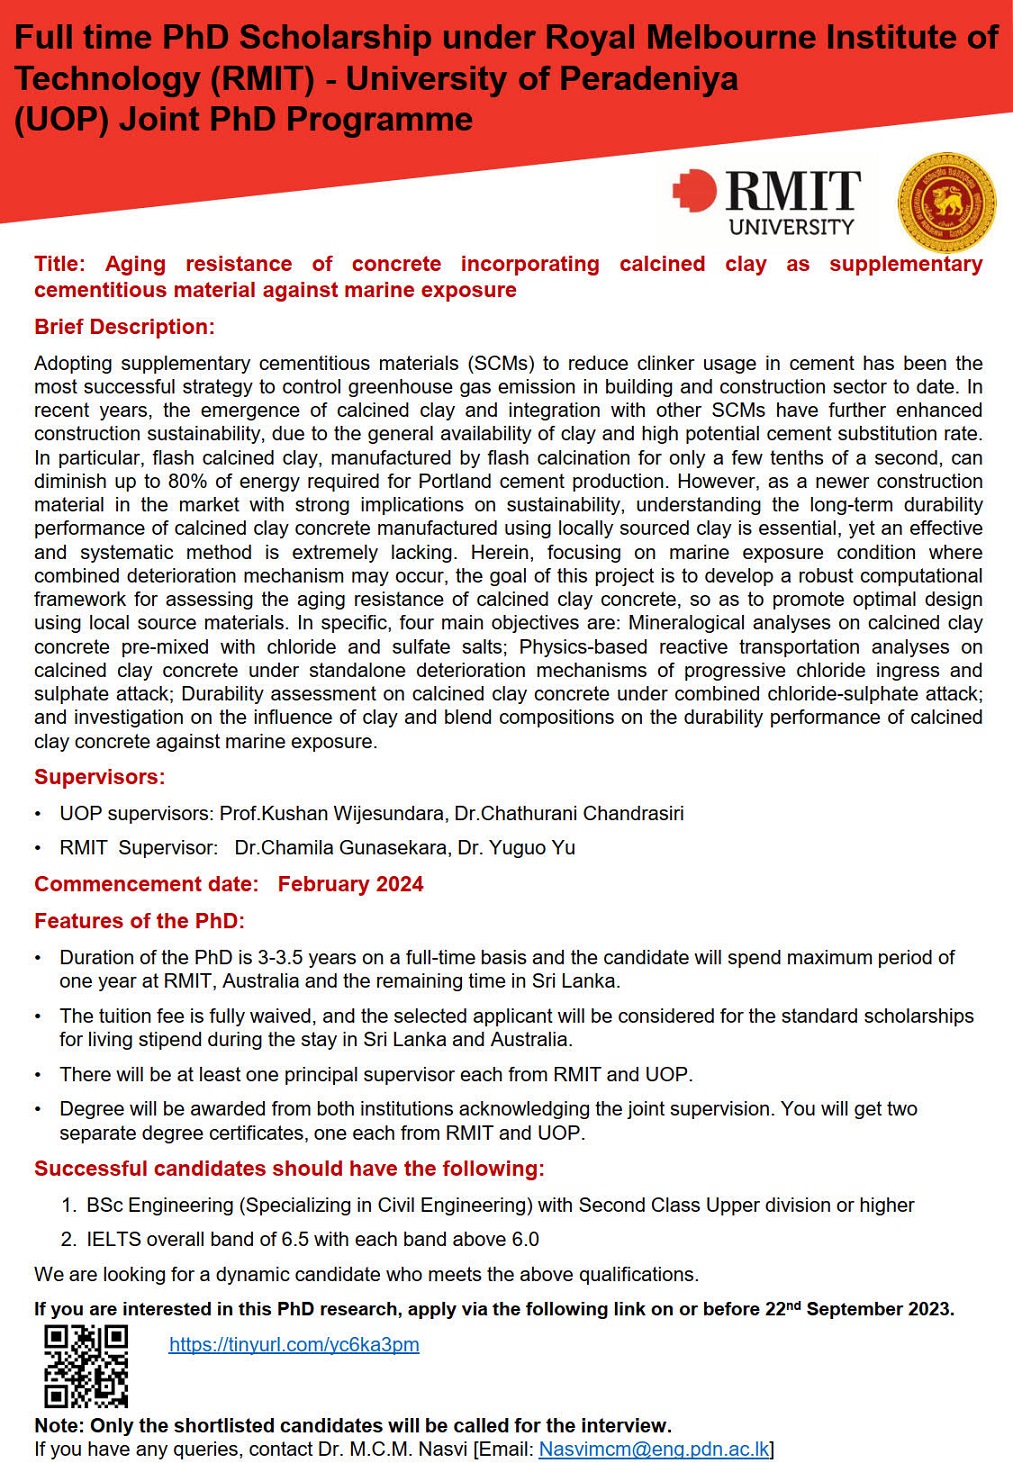 Full time PhD Scholarship-RMIT and UOP- Aging resistance of concrete incorporating calcined clay ....